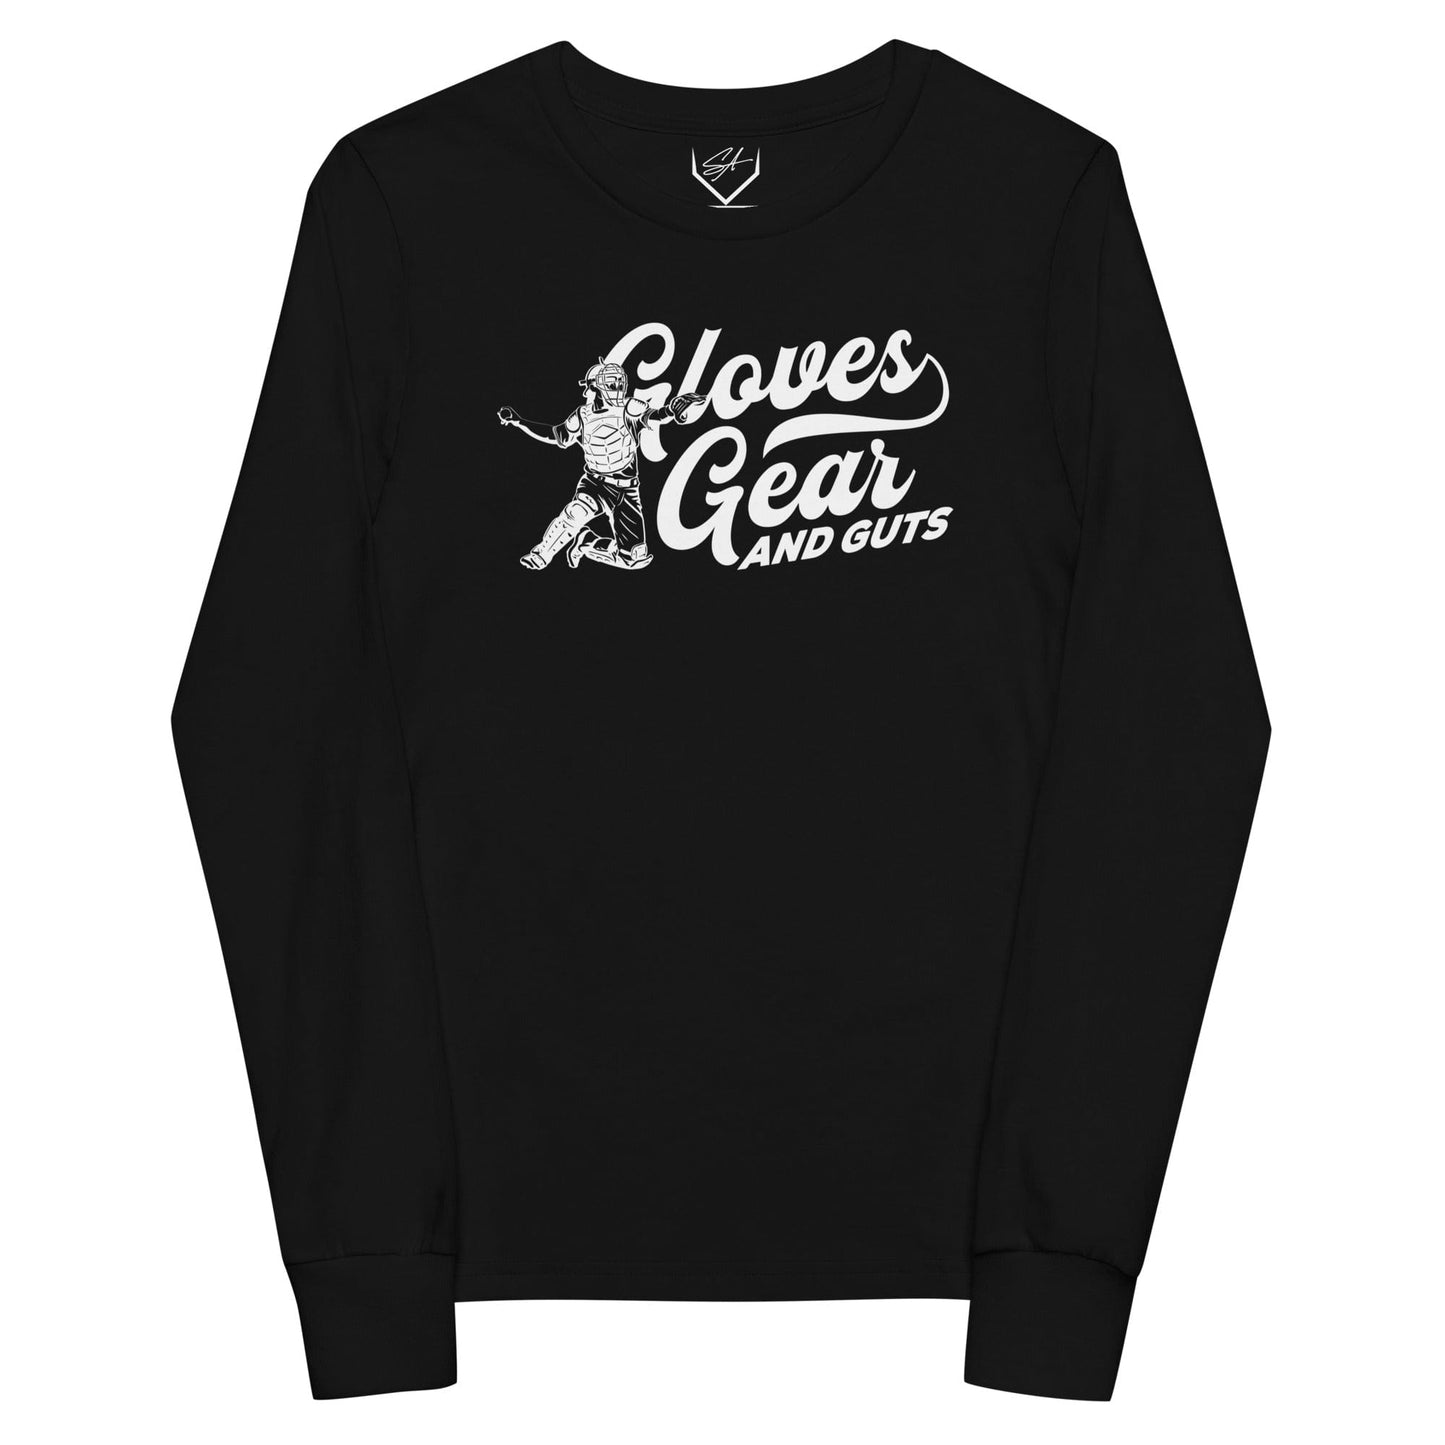 Gloves Gear And Guts - Youth Long Sleeve